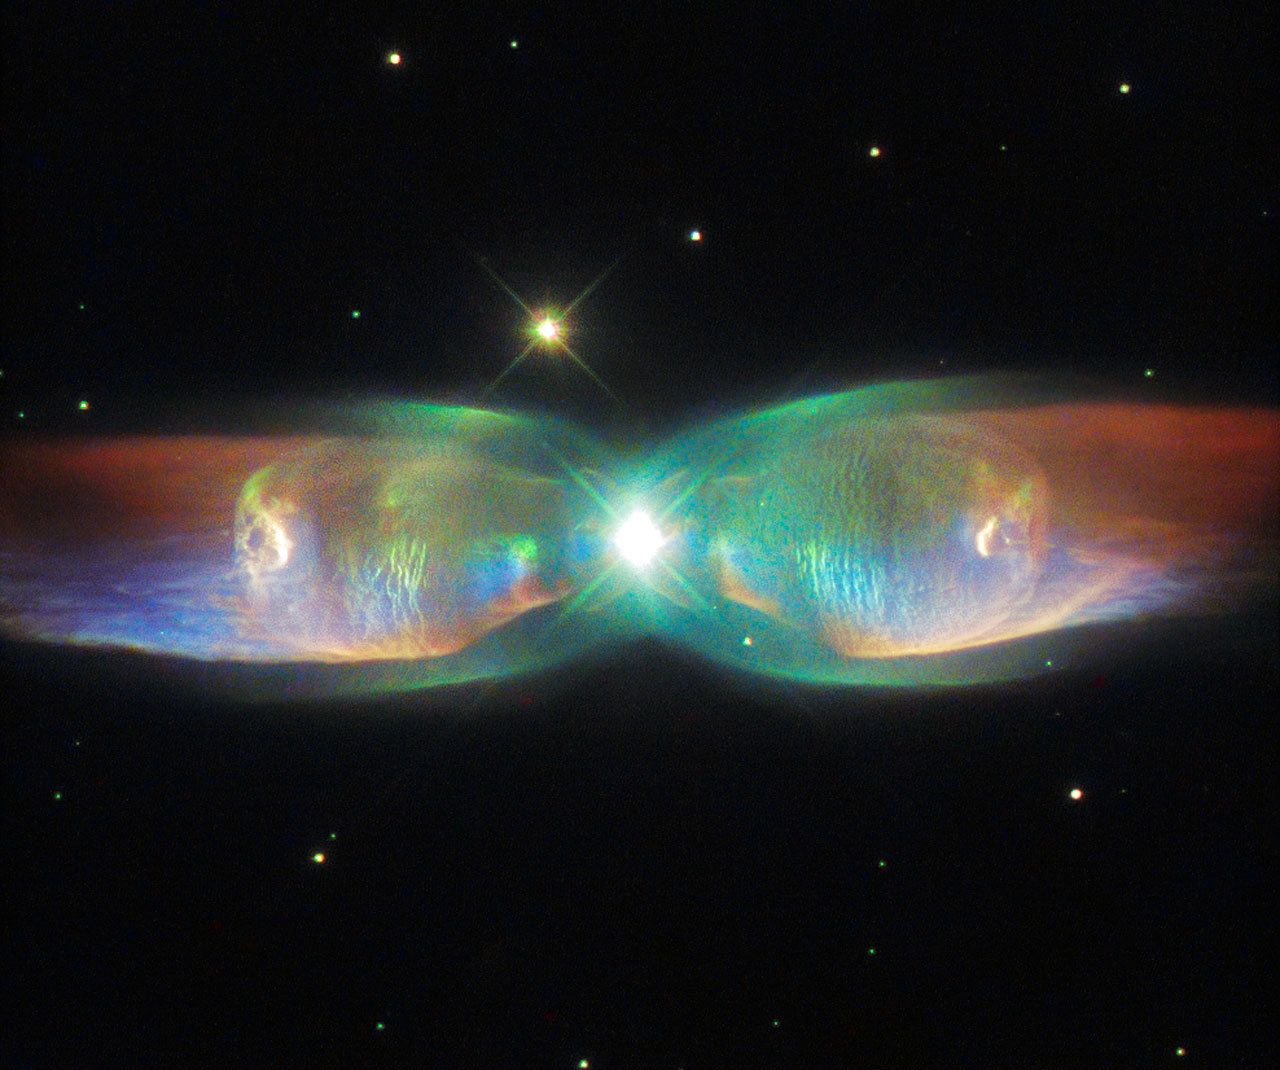 The shimmering colors visible in this Hubble Space Telescope image show off the remarkable complexity of the Twin Jet Nebula, or PN M2-9.